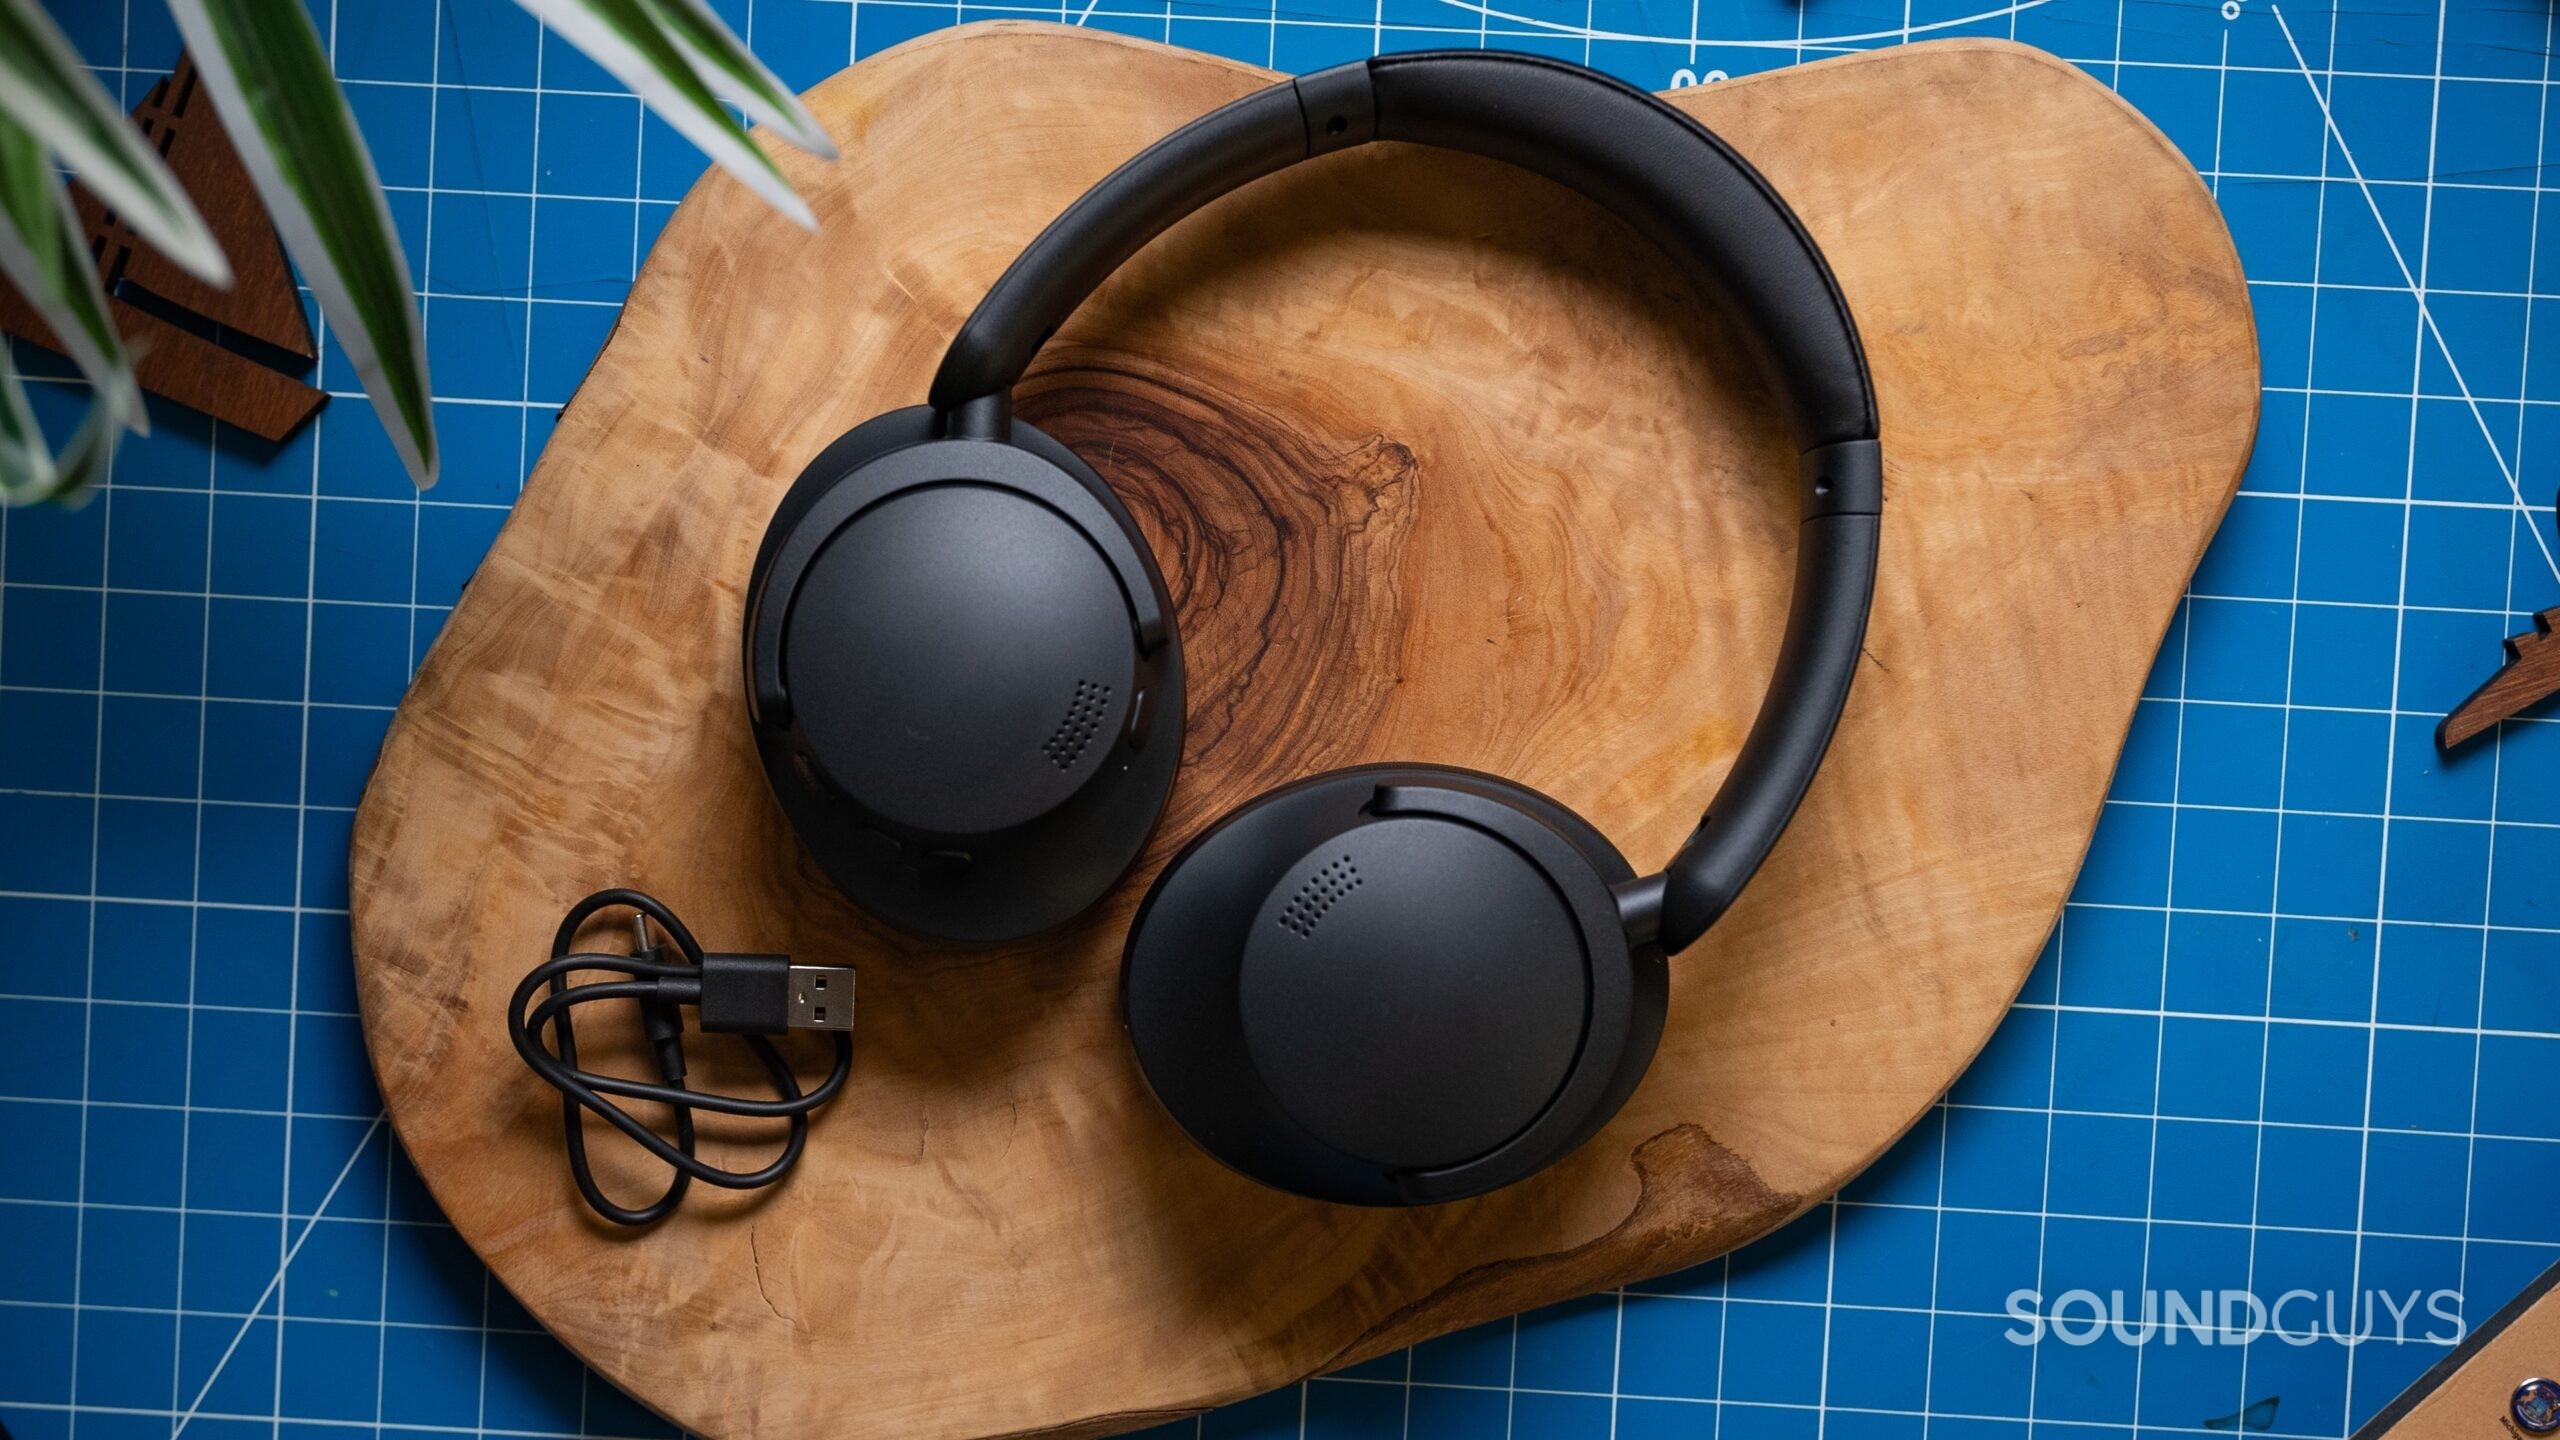 Review: Soundcore Life Q35 are my new headphones! (Photo Heavy and Long) -  OVER-EAR - soundcore Collective